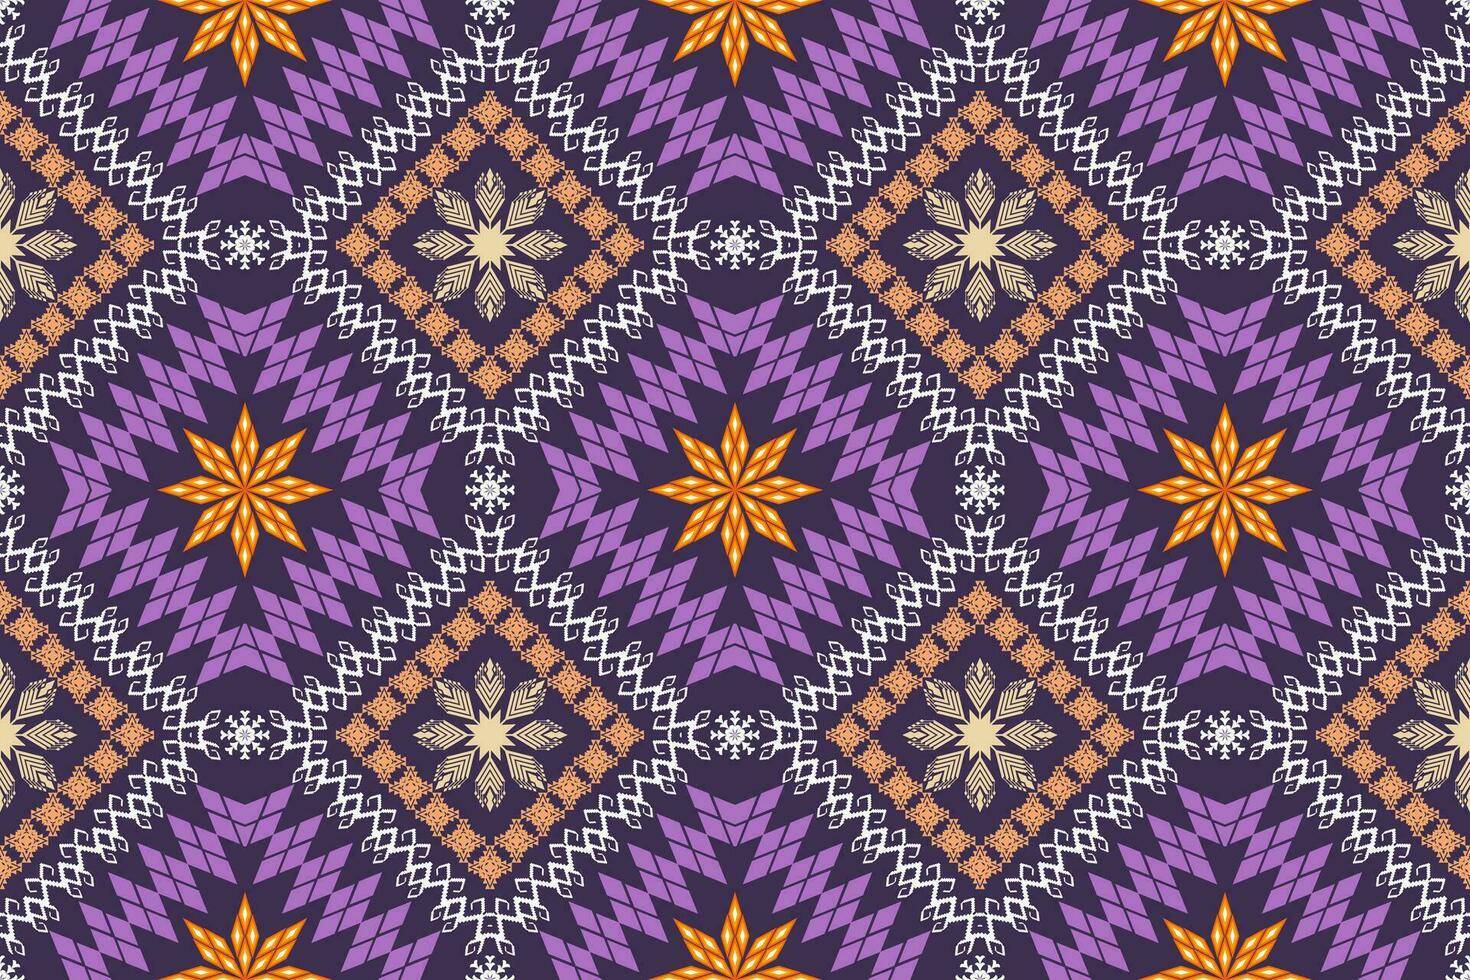 Geometric ethnic aztec embroidery style.Figure ikat oriental traditional art pattern.Design for ethnic background,wallpaper,fashion,clothing,wrapping,fabric,element,sarong,graphic,vector illustration. vector